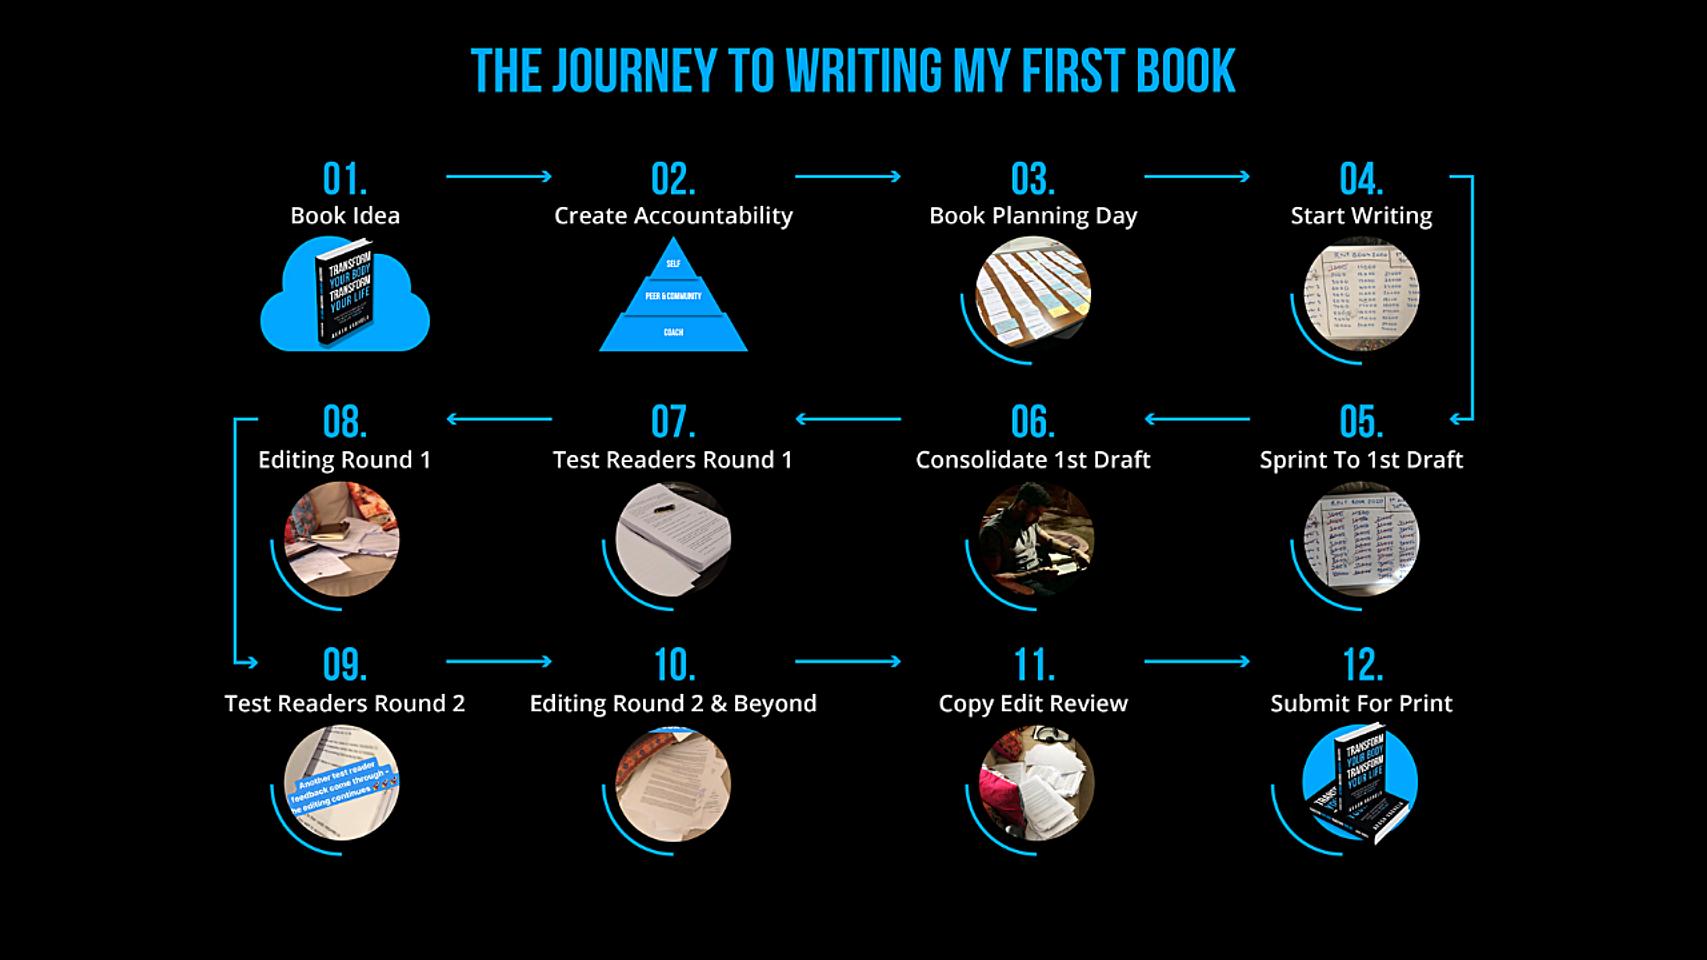 Writing My First Book, Part Two: The Writing Journey